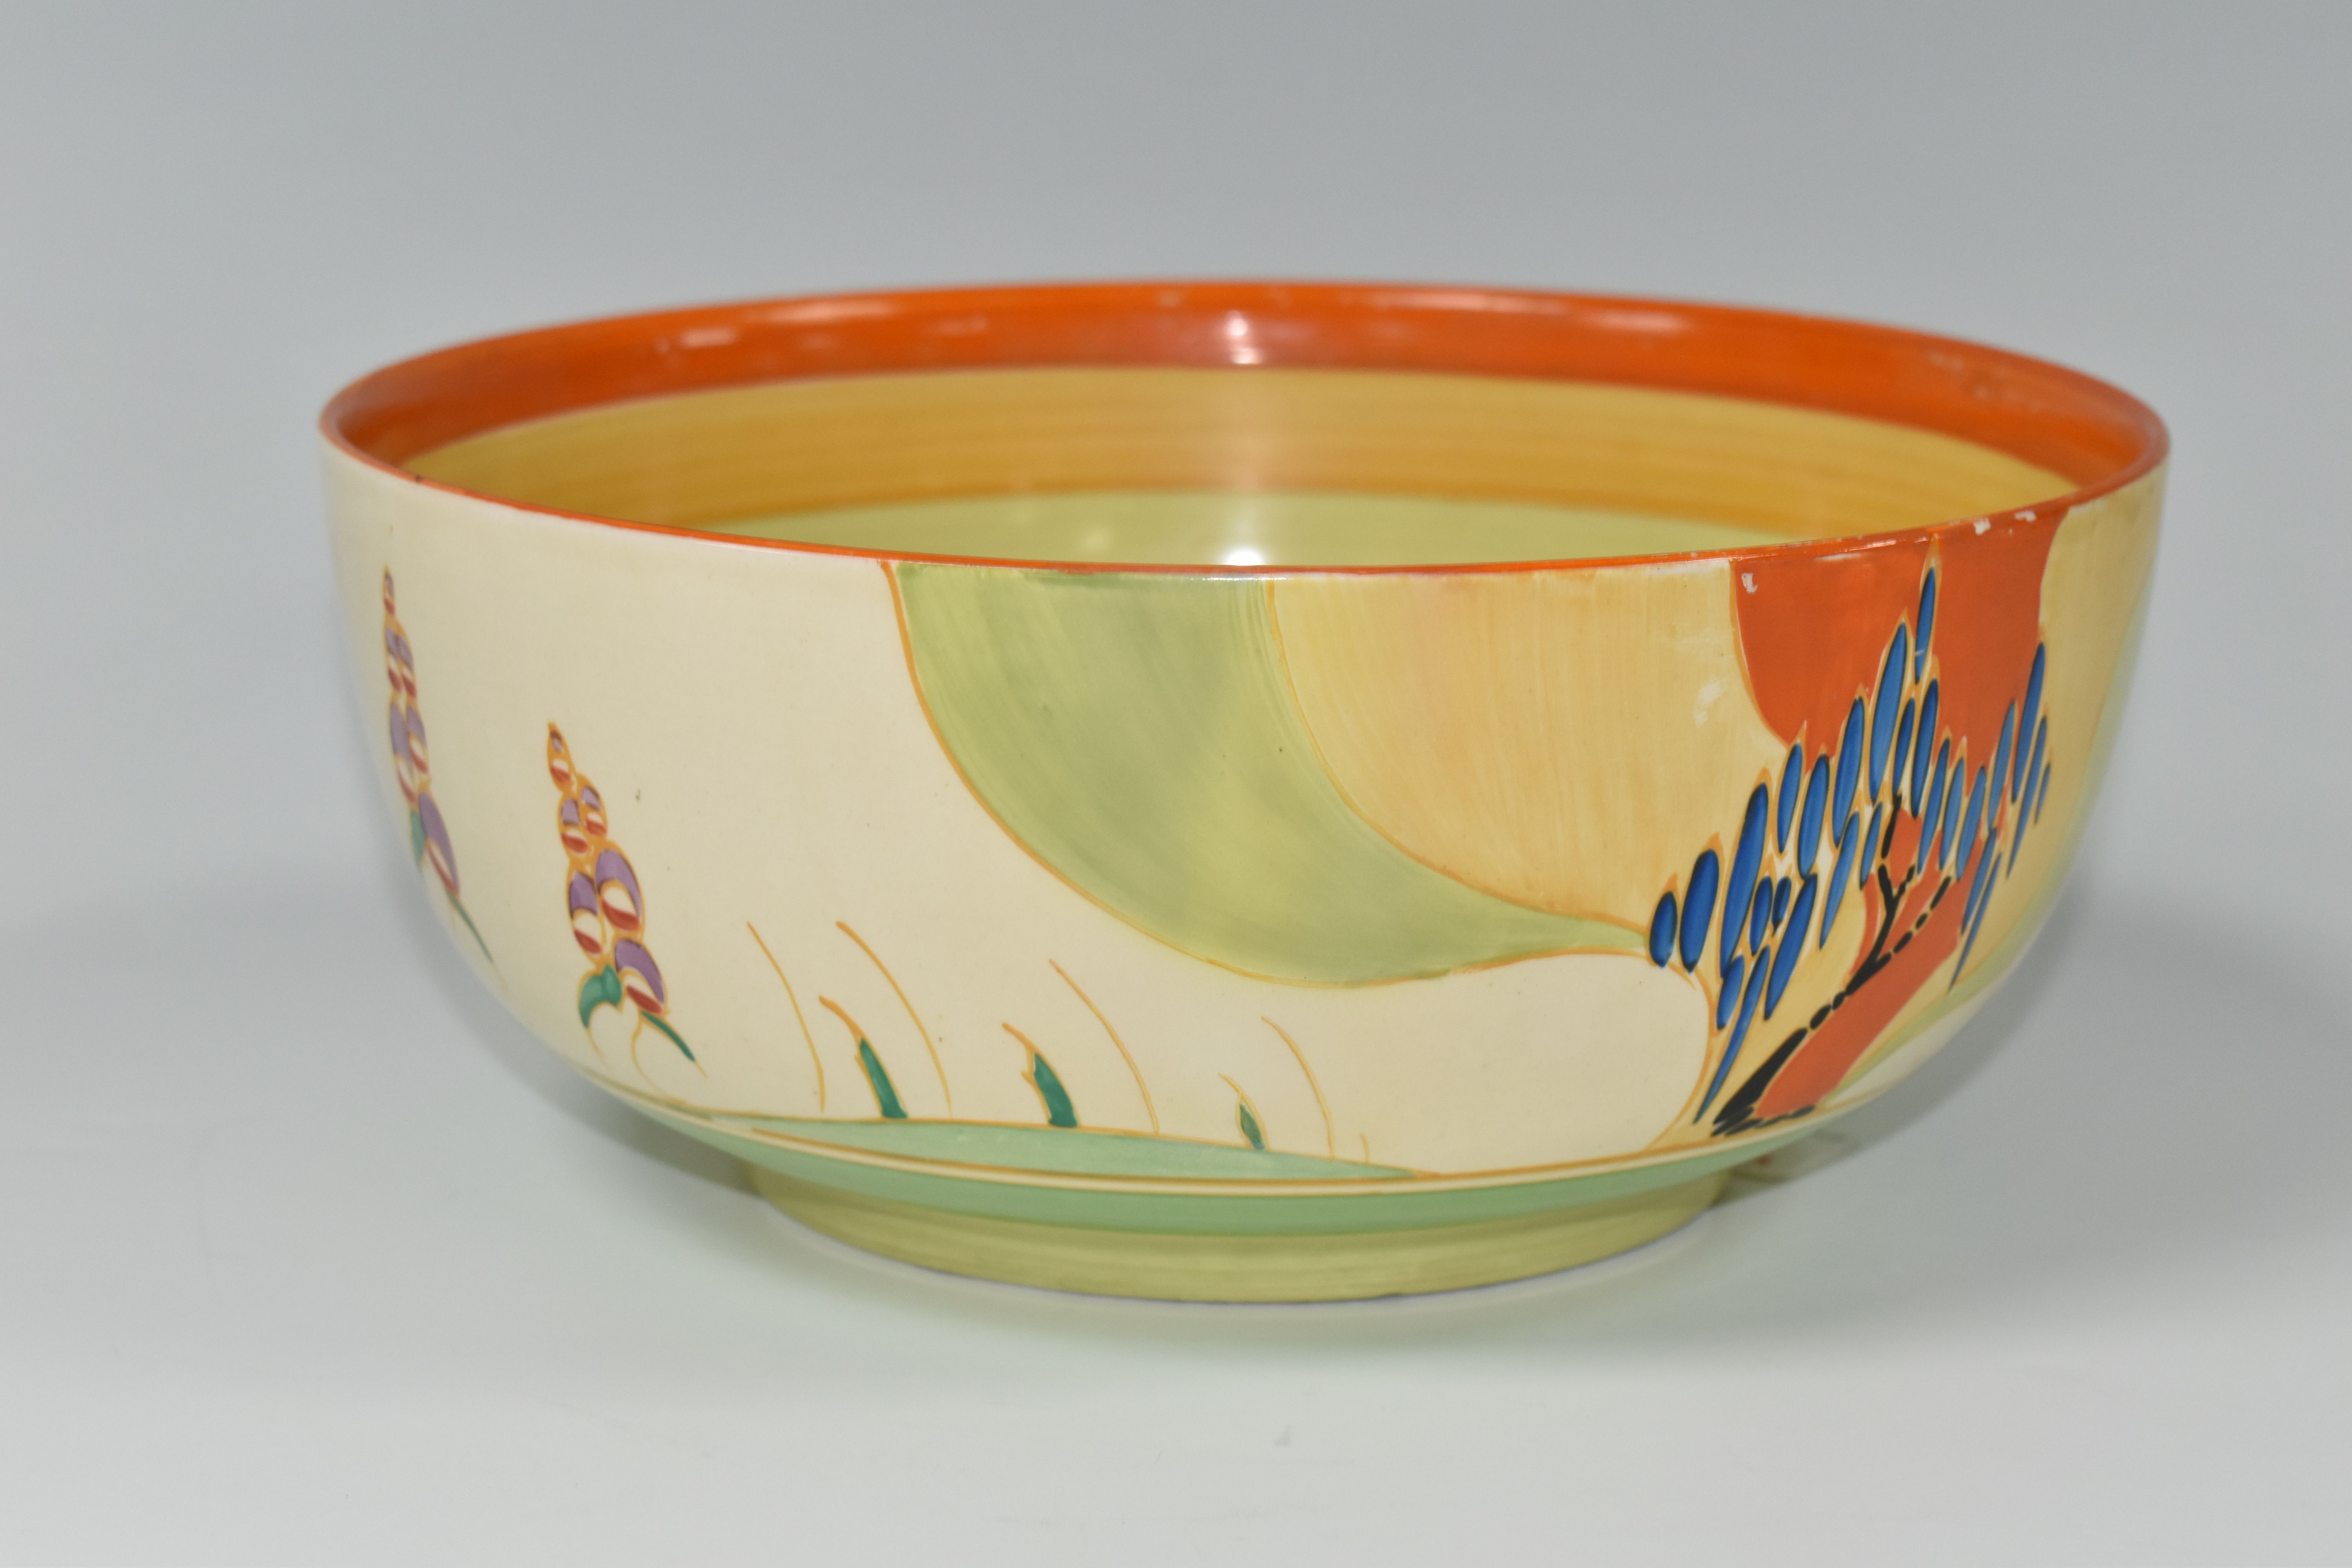 A CLARICE CLIFF 'WINDBELLS' DESIGN BOWL, with a vibrant orange, yellow, green and cream banding on - Image 2 of 7